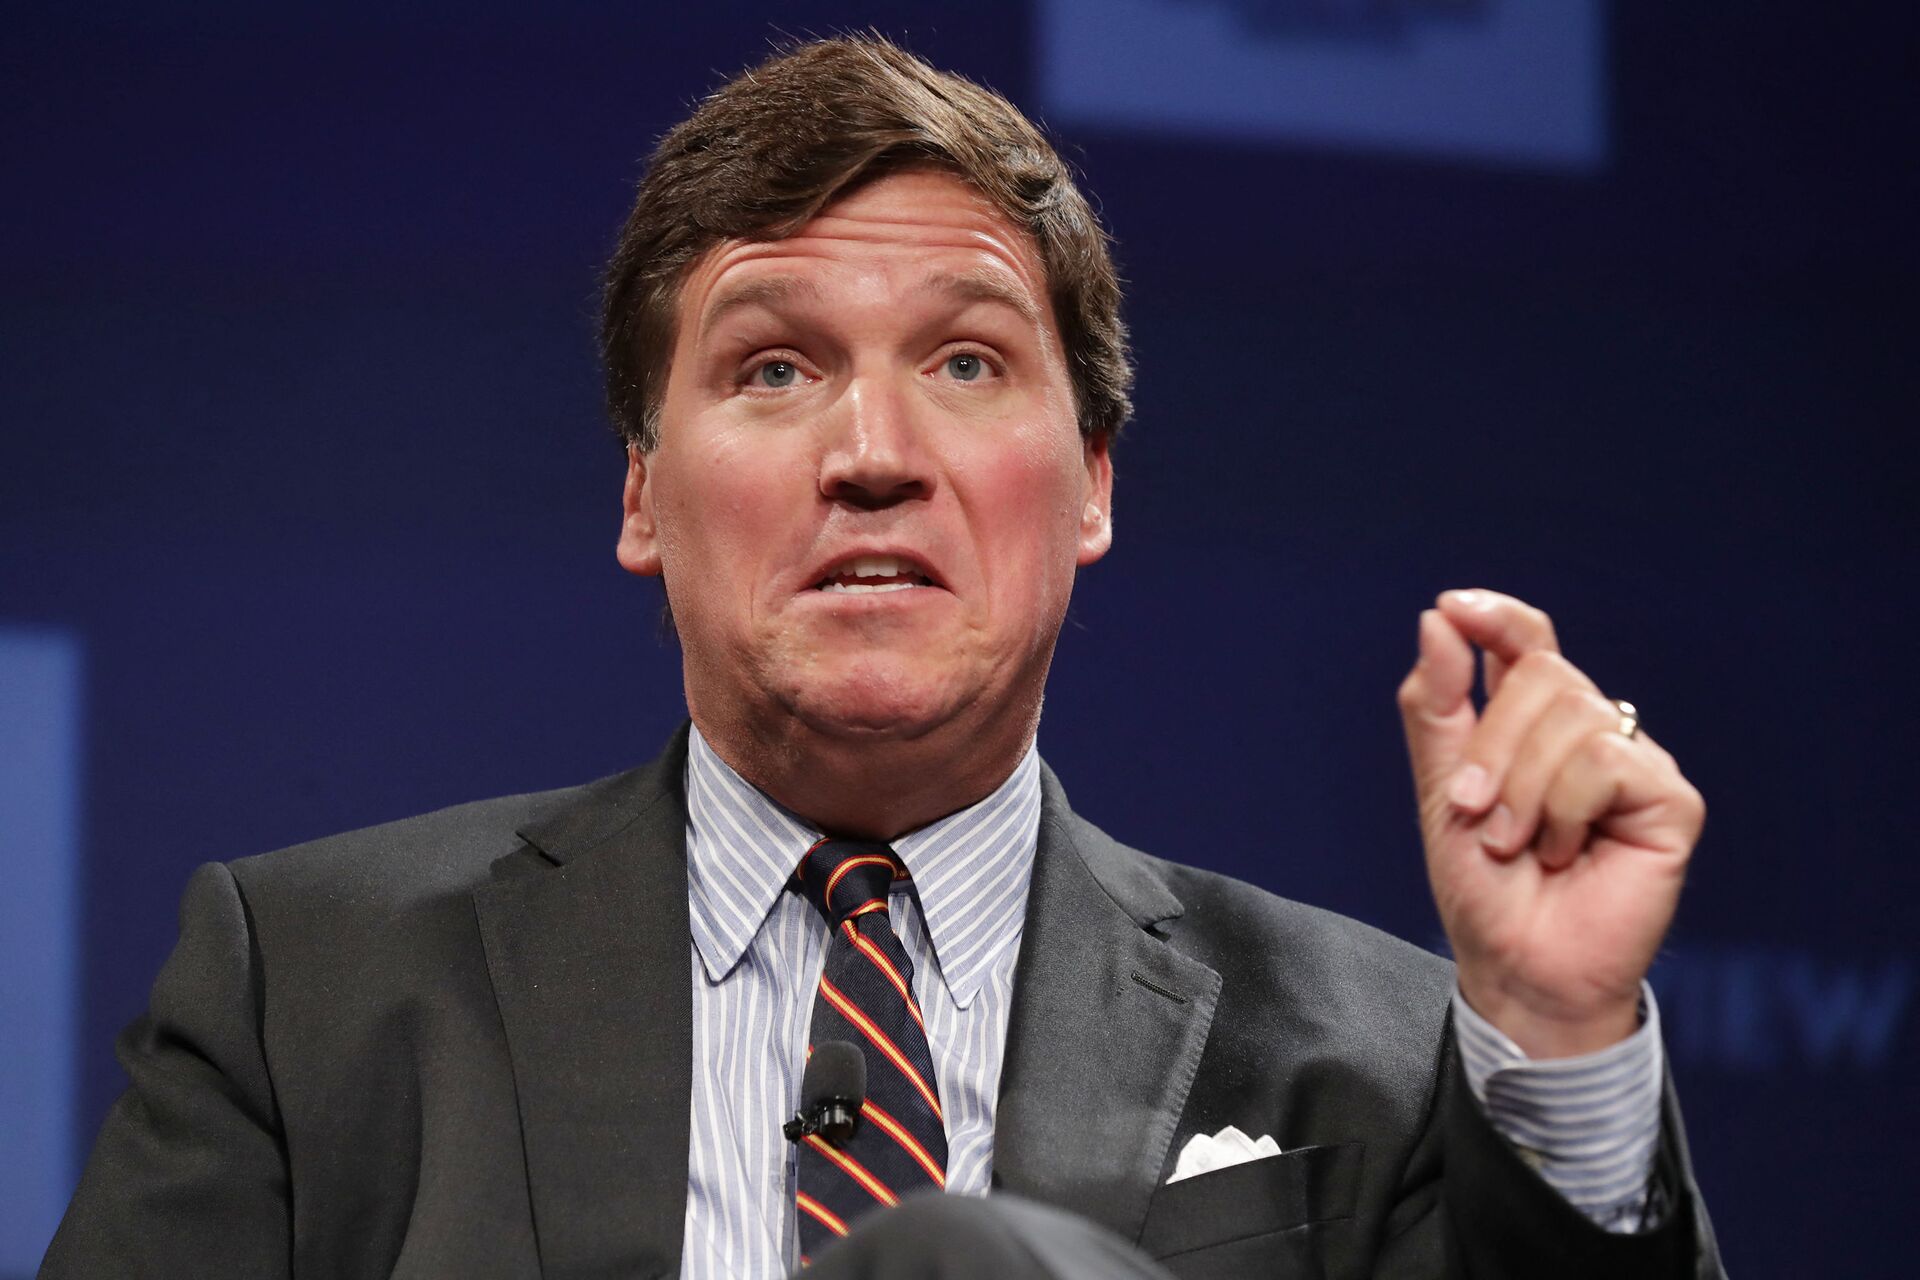 Fox News host Tucker Carlson discusses 'Populism and the Right' during the National Review Institute's Ideas Summit at the Mandarin Oriental Hotel March 29, 2019 in Washington, DC.  - Sputnik International, 1920, 07.09.2021